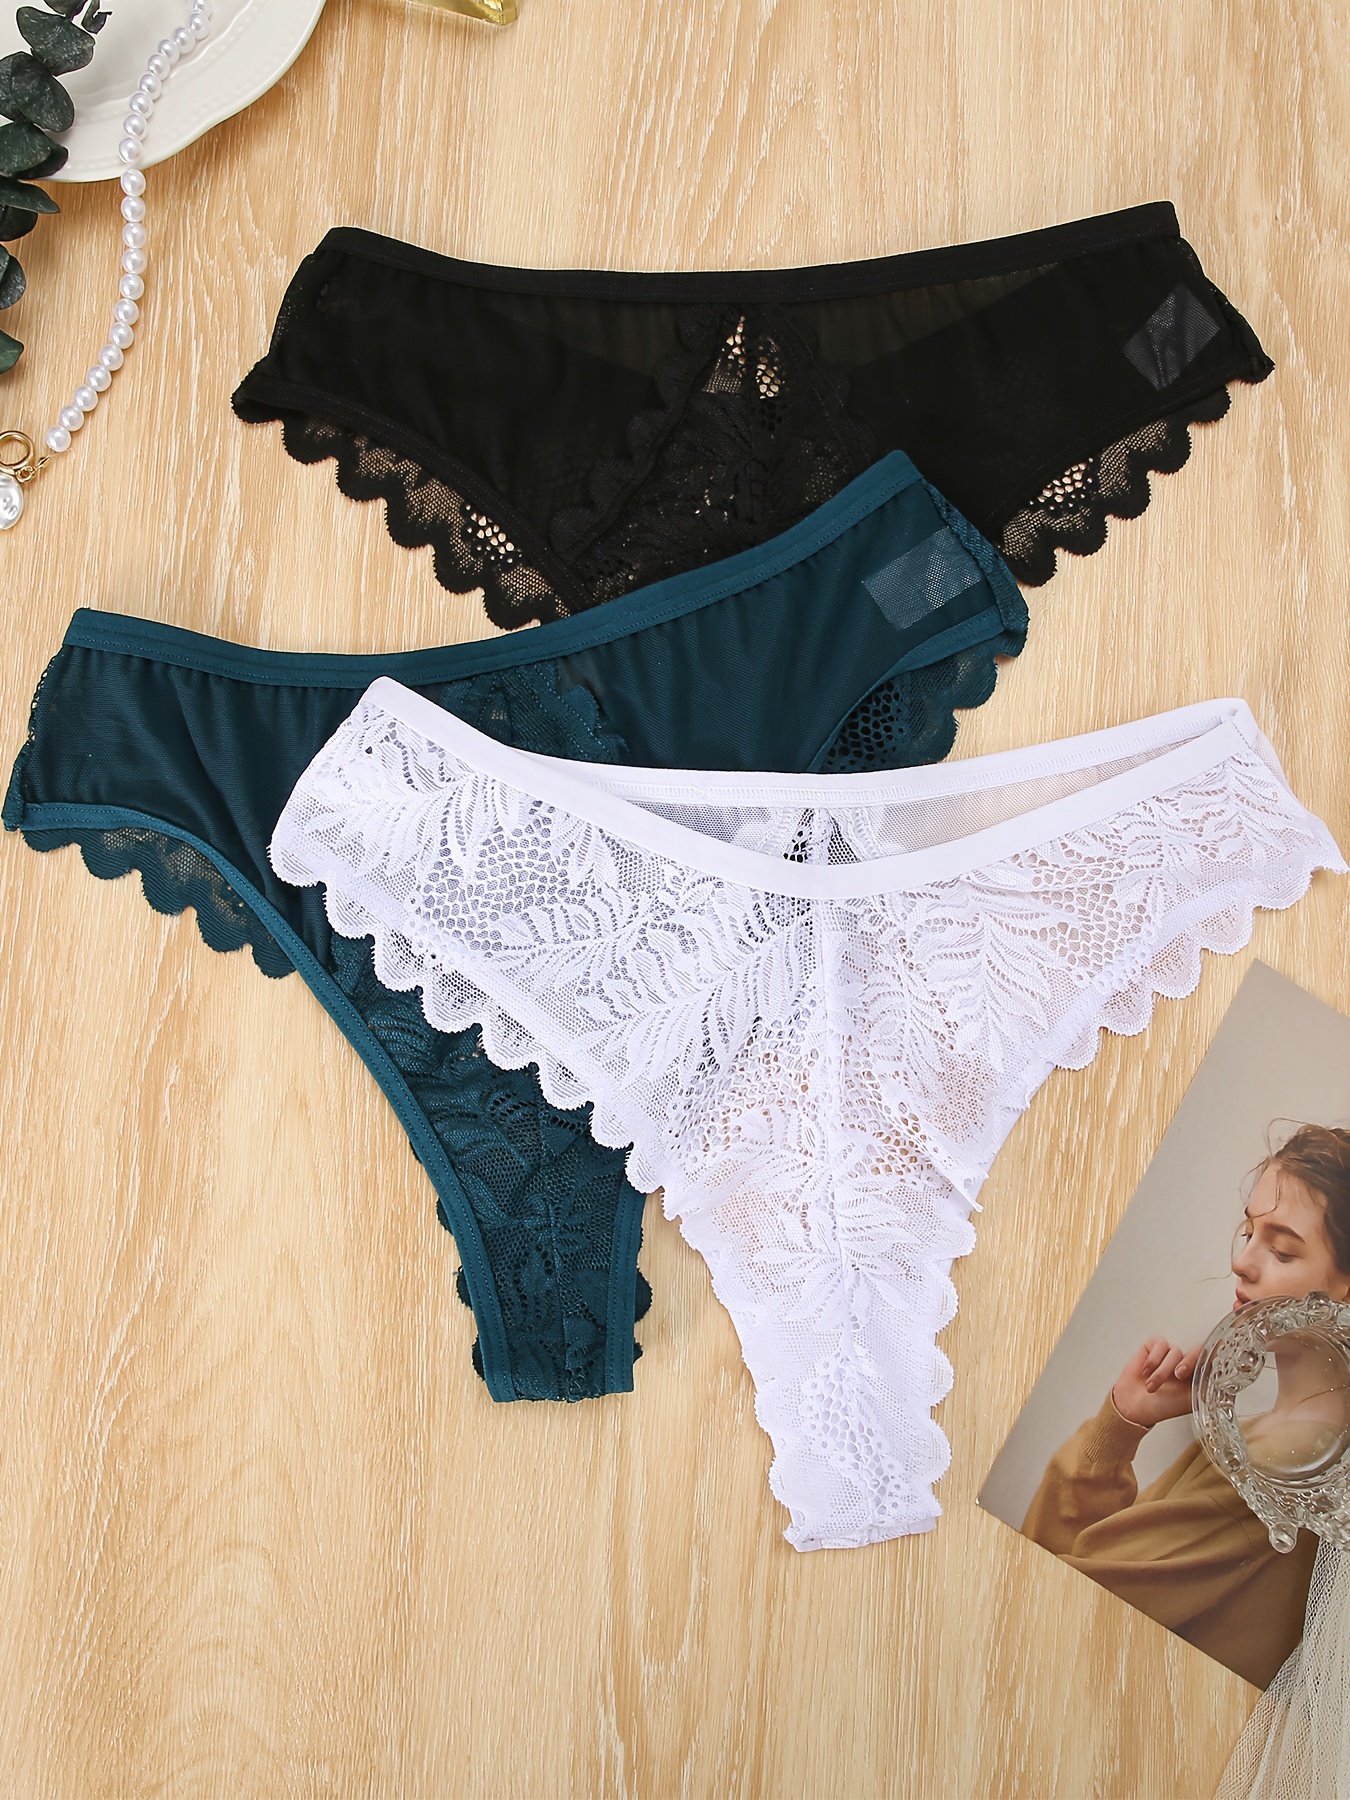 Lace Panties, the Most Flattering Lacy Underwear